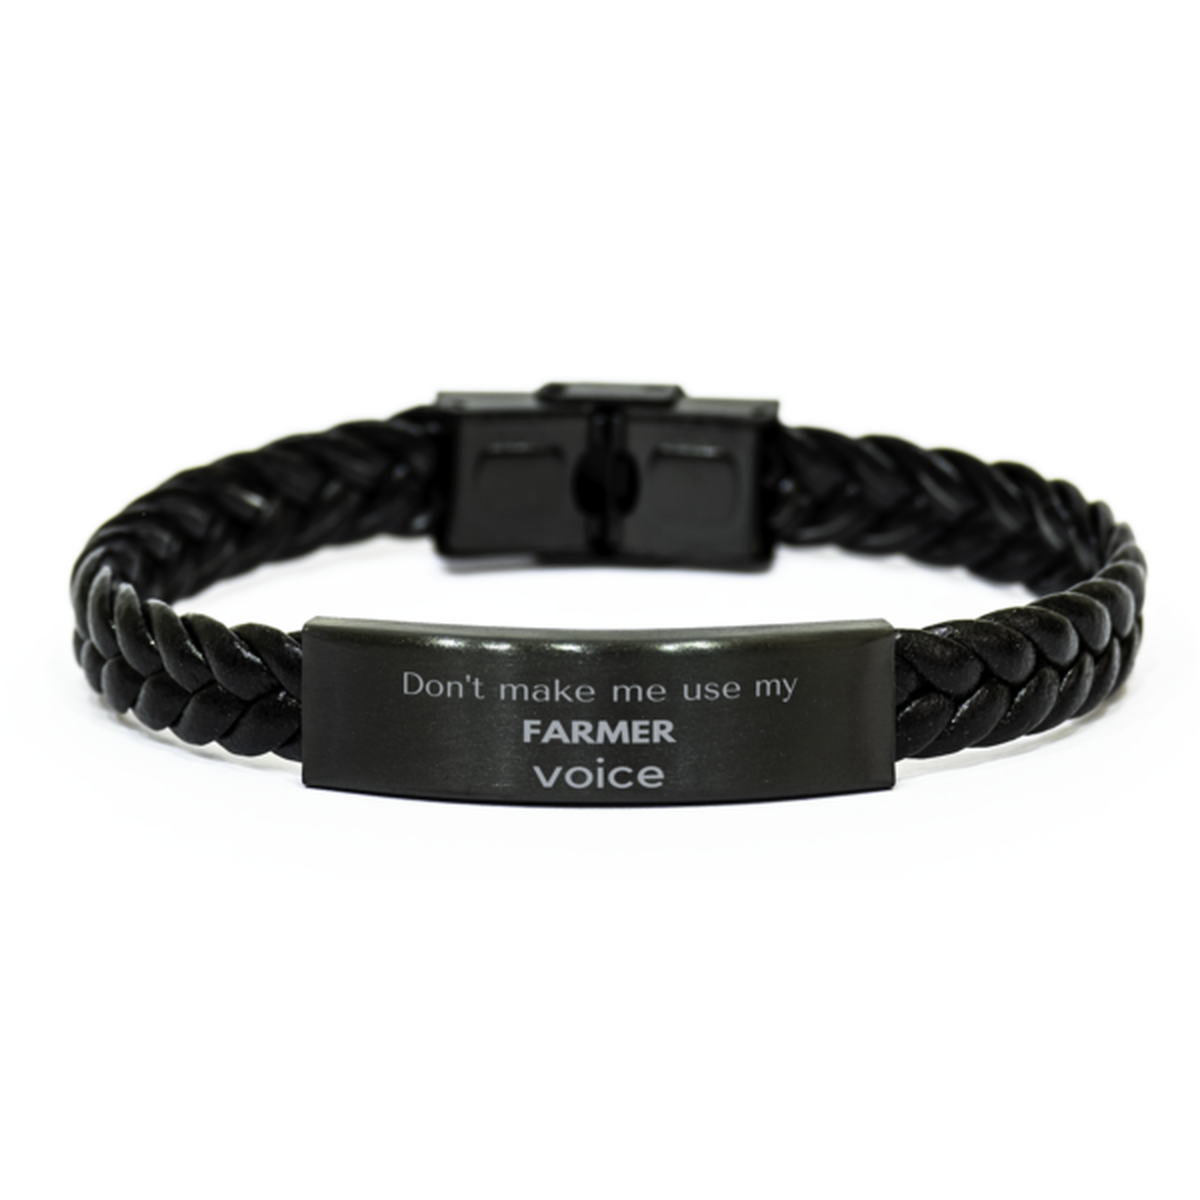 Don't make me use my Farmer voice, Sarcasm Farmer Gifts, Christmas Farmer Braided Leather Bracelet Birthday Unique Gifts For Farmer Coworkers, Men, Women, Colleague, Friends